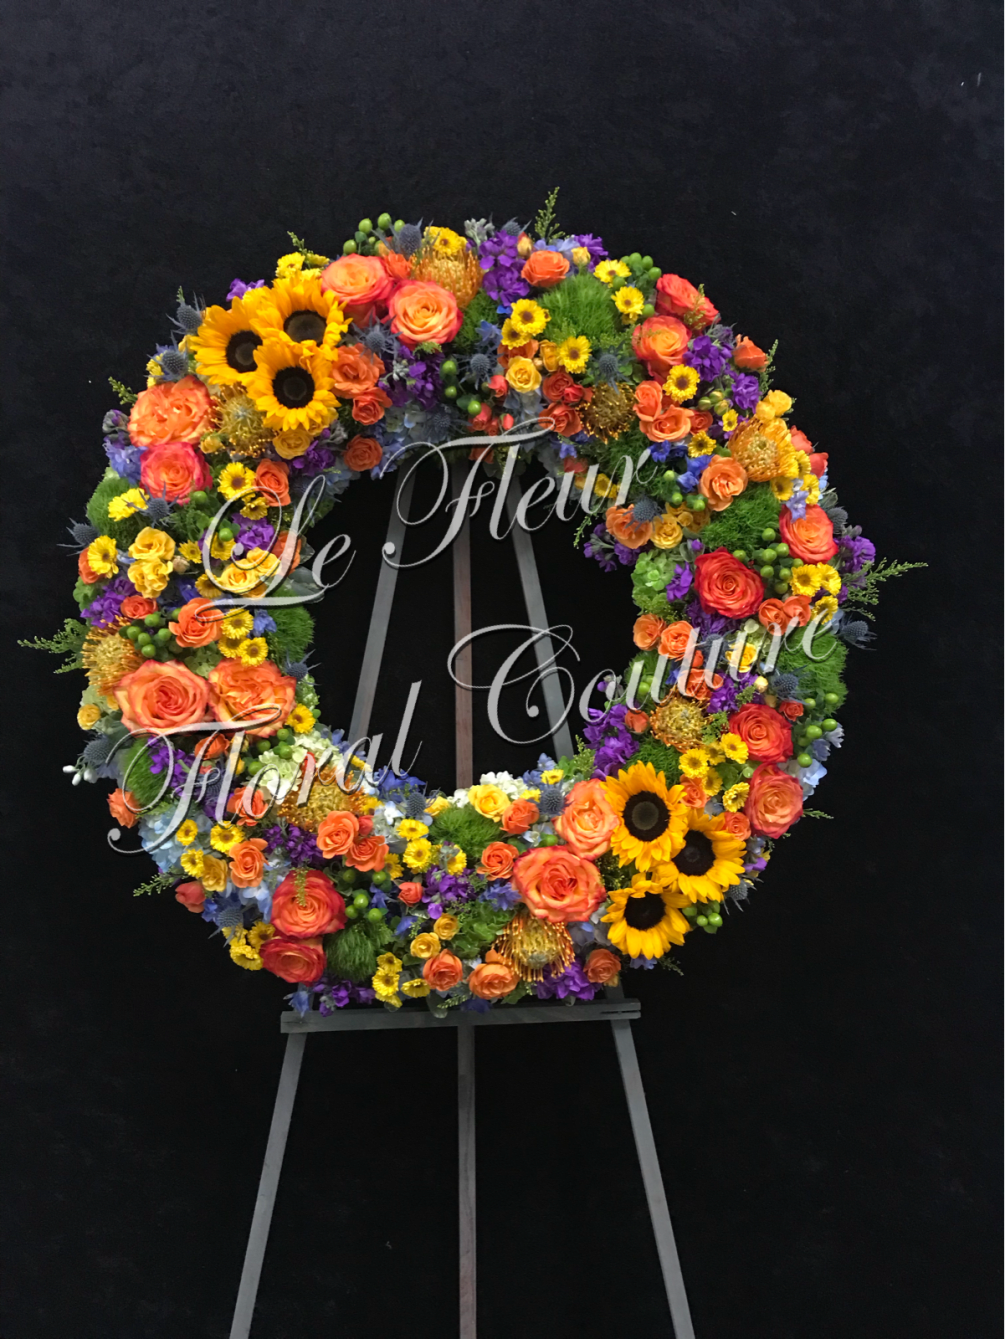 A beautiful sympathy wreath filled with various vibrant flowers of spring mixed